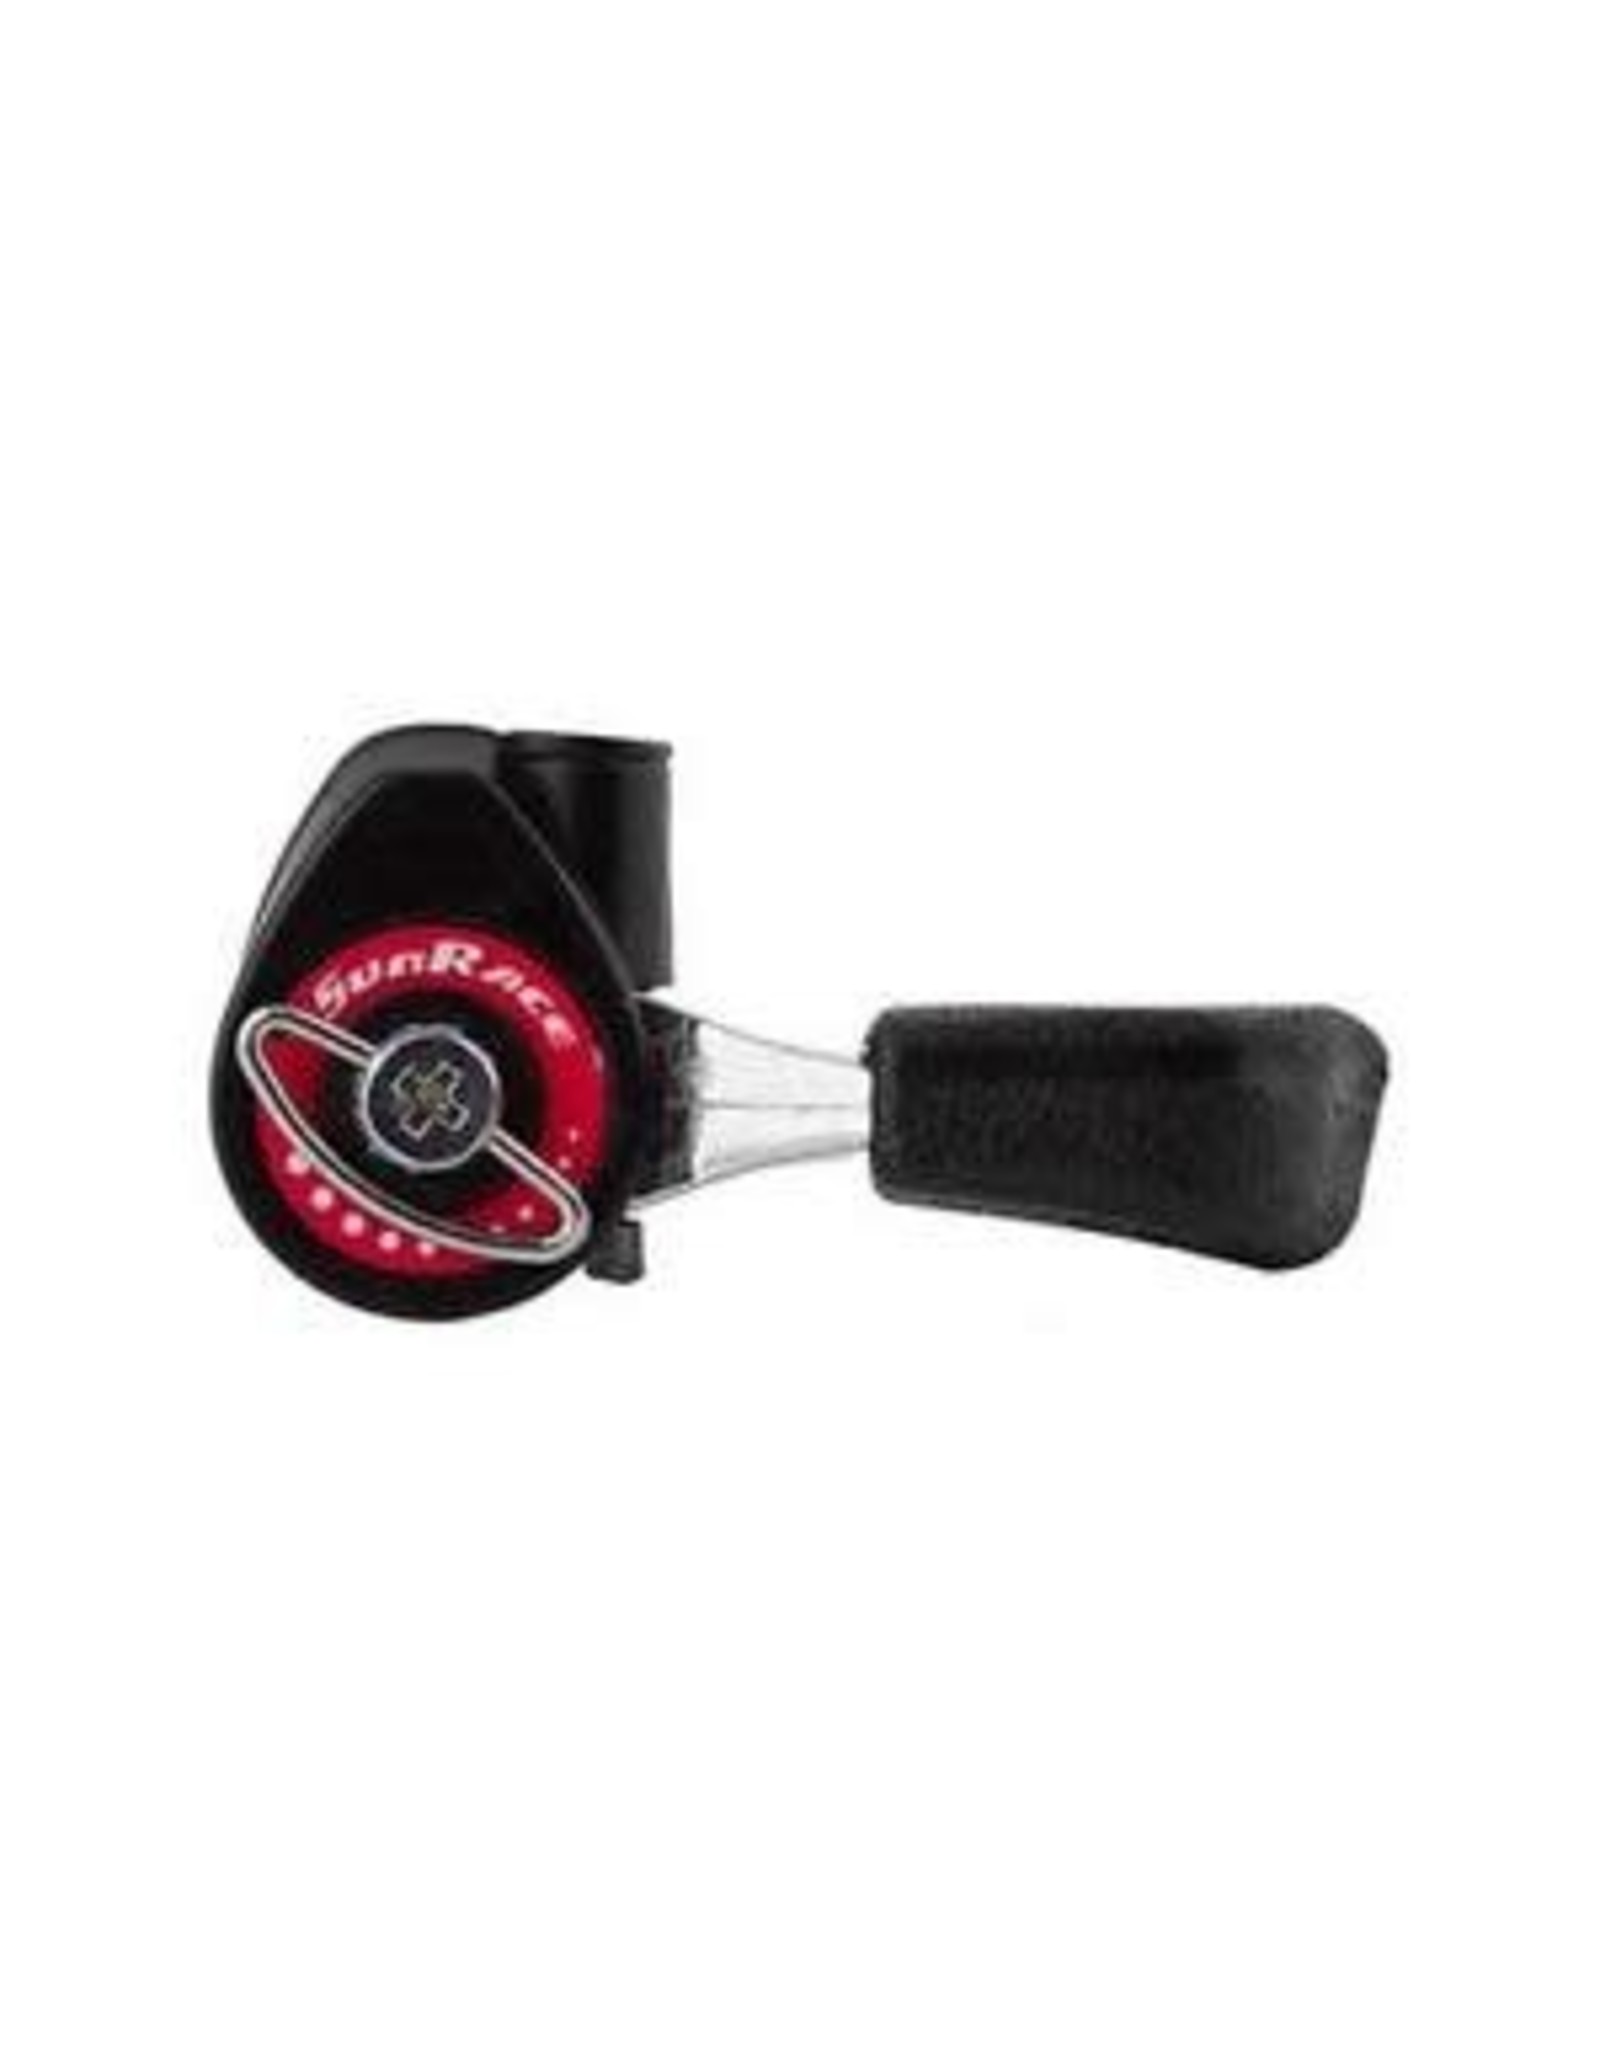 Sunrace SLM10 Friction Shifter Righthand 